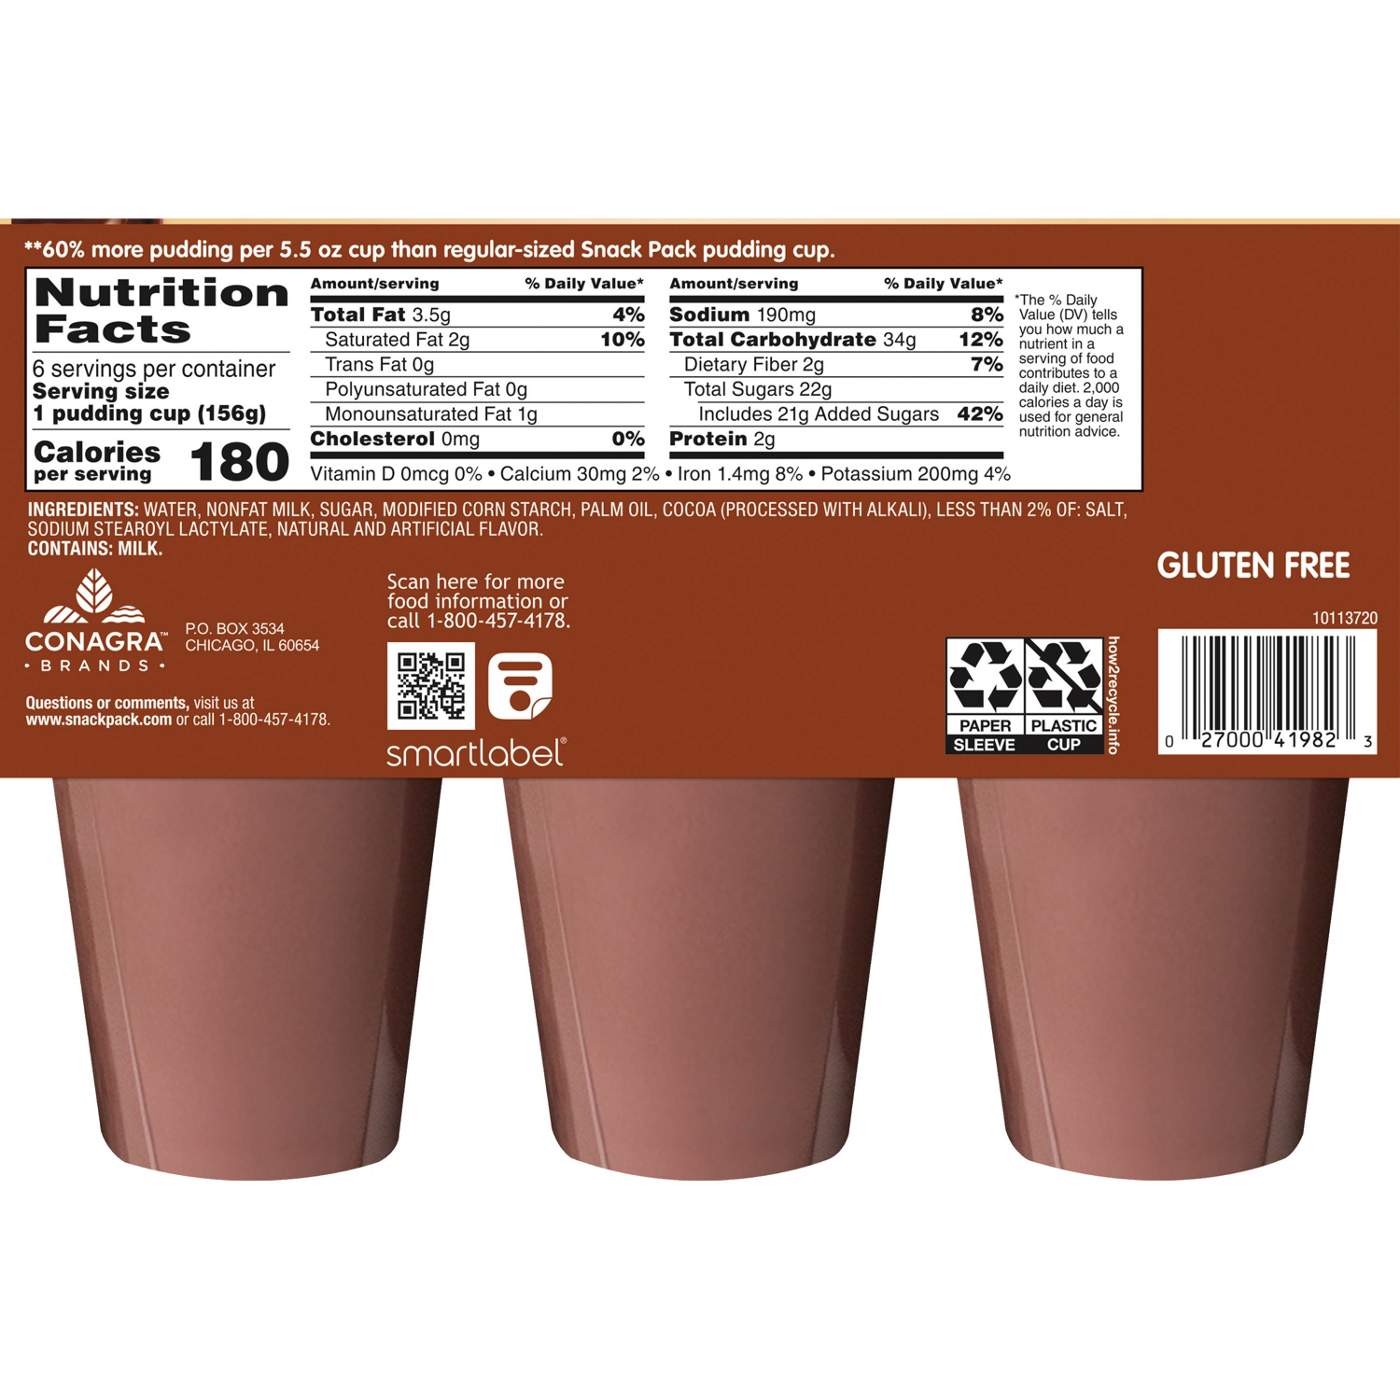 Snack Pack Super Size Chocolate Pudding Cups; image 7 of 7